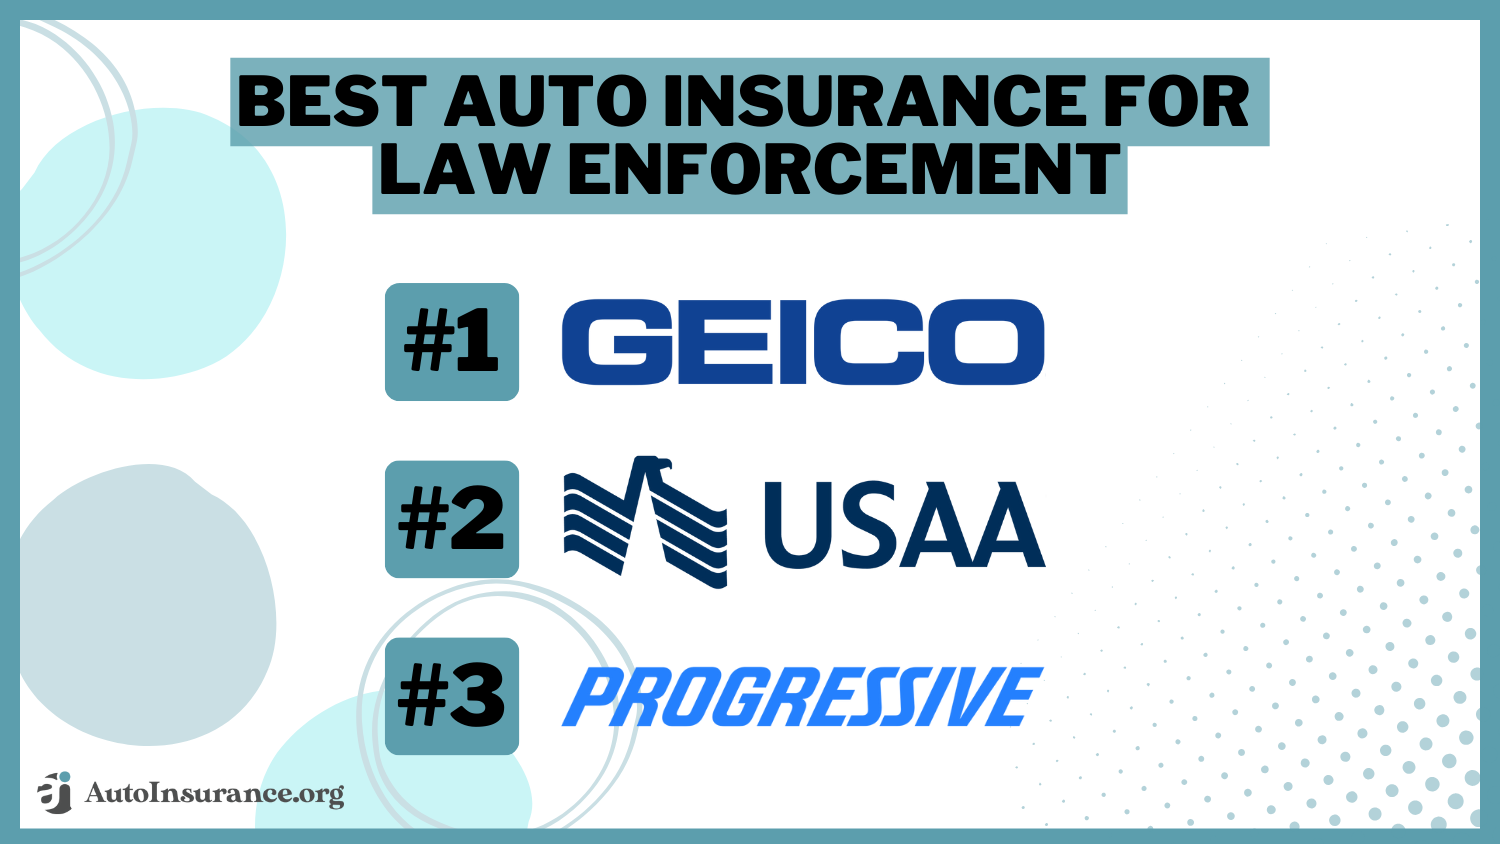 Best Auto Insurance for Law Enforcement: Geico, USAA, and Progressive